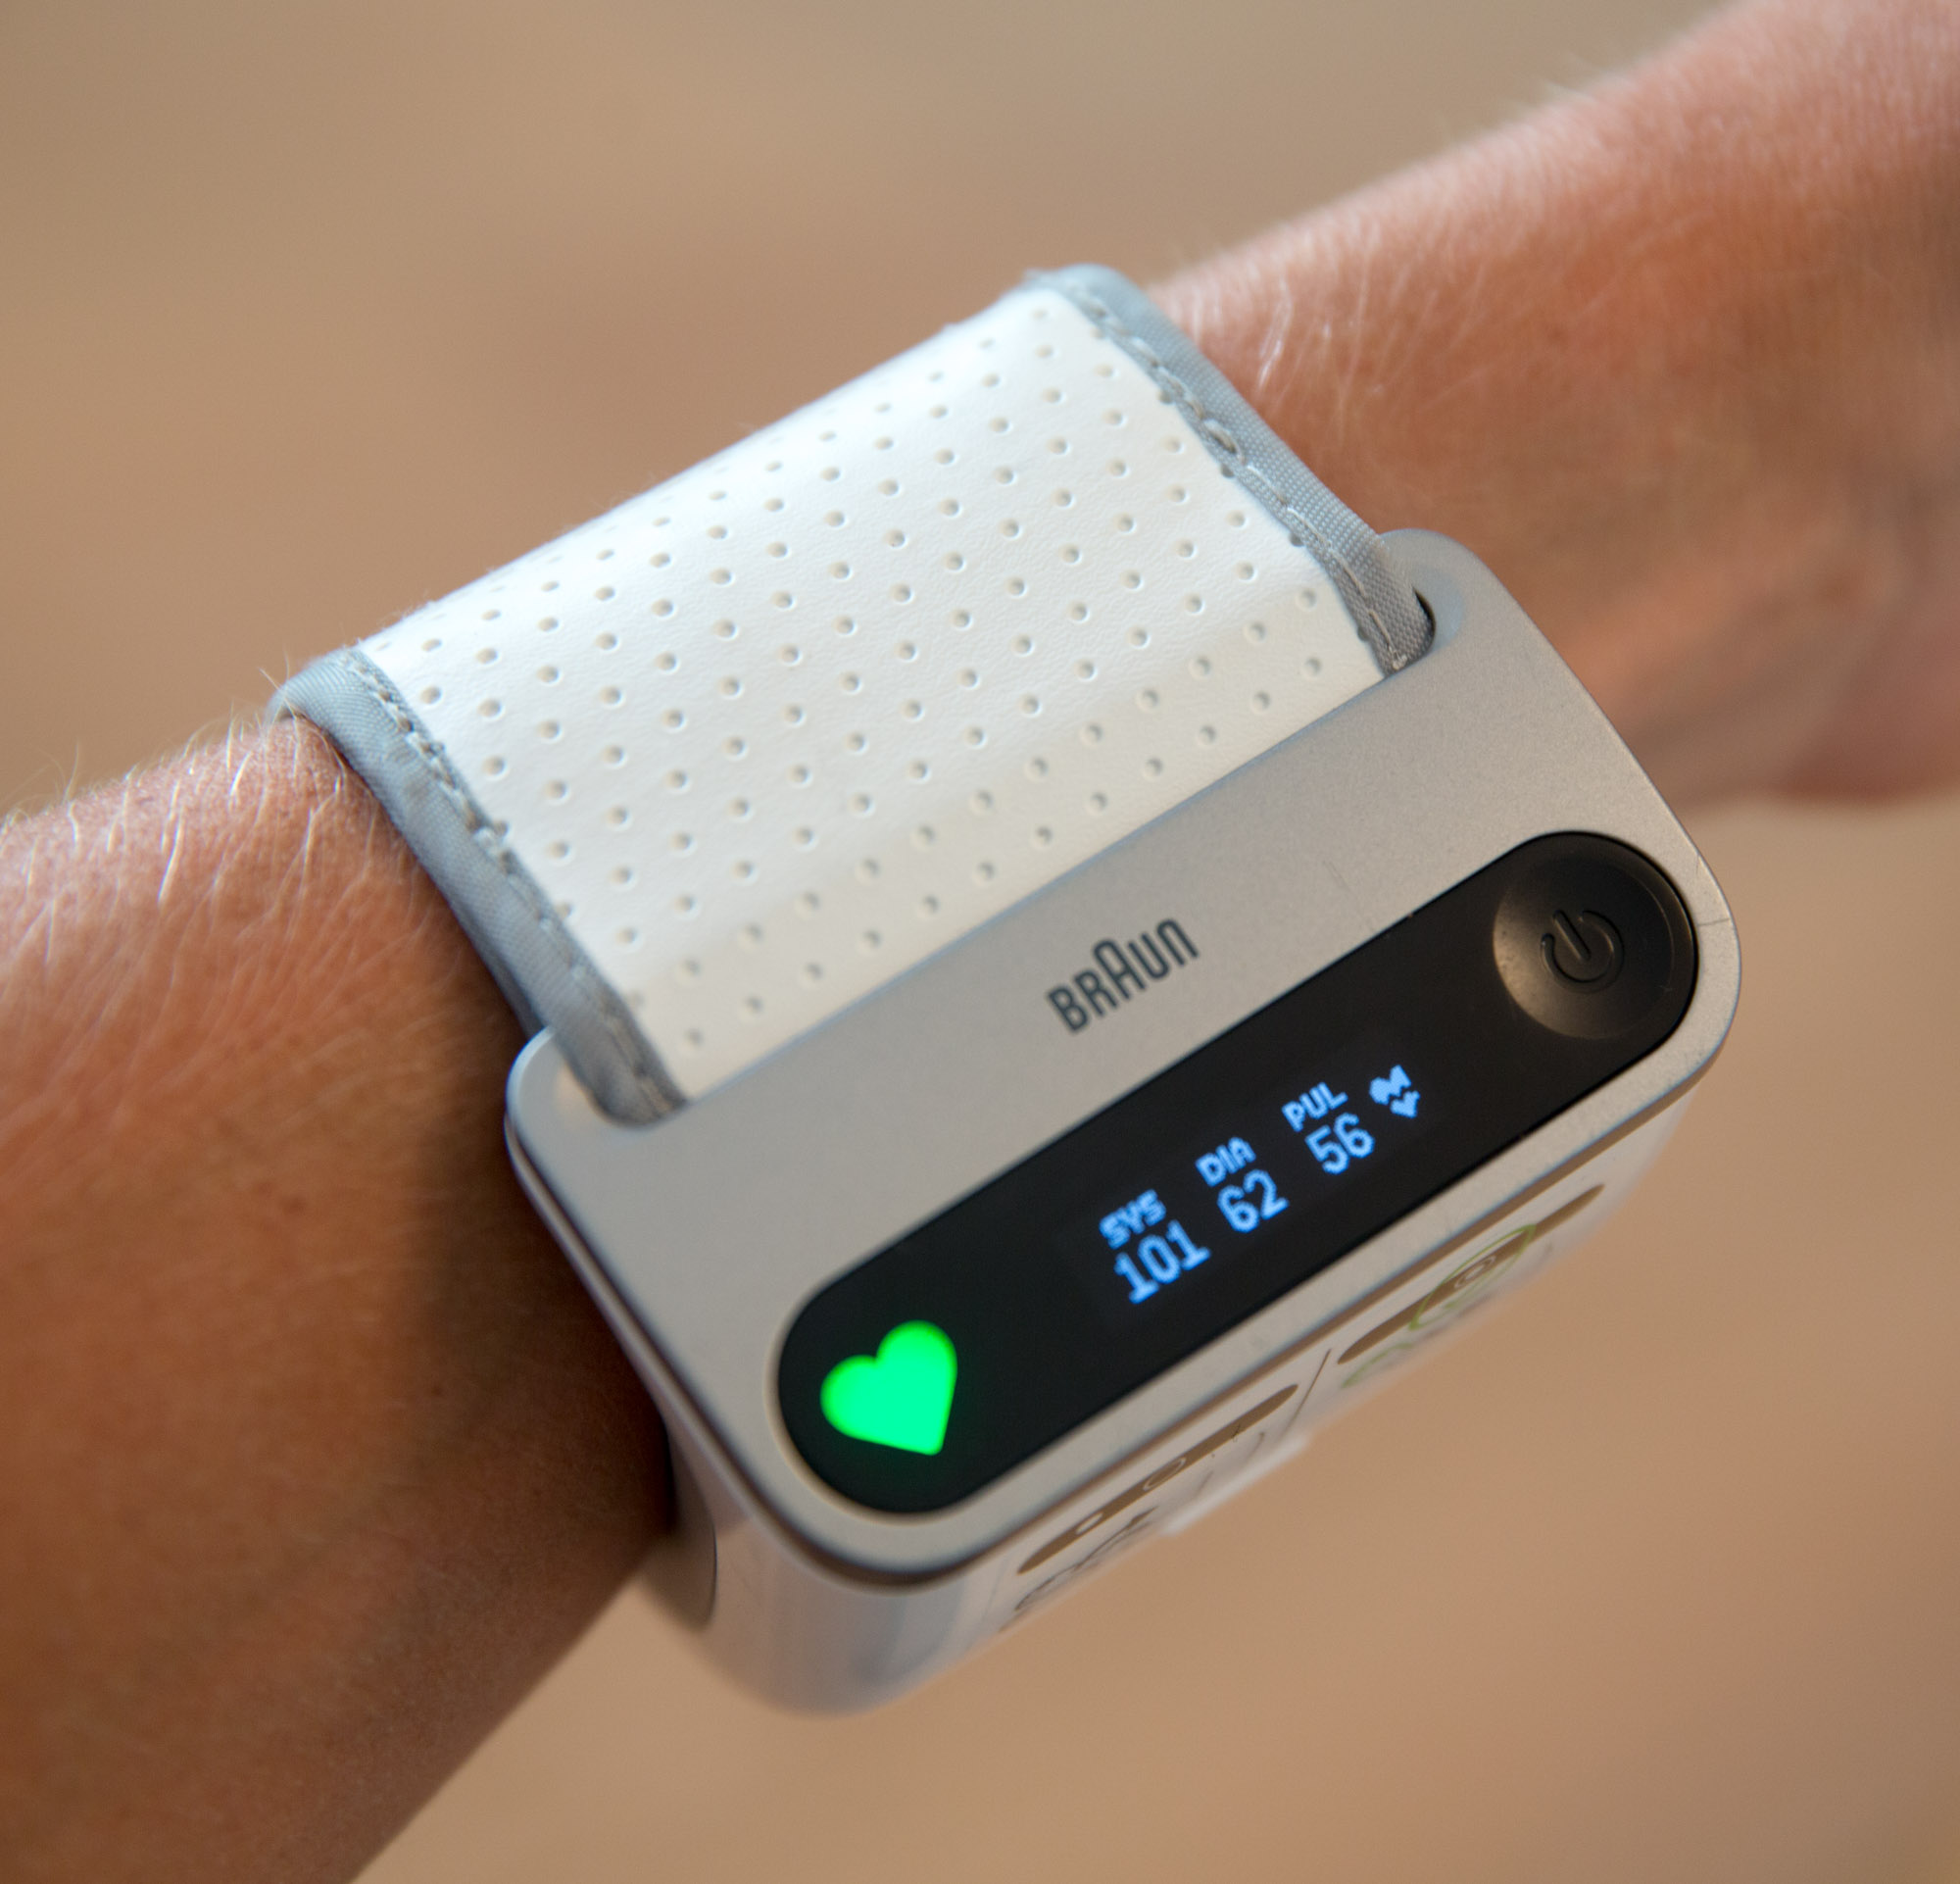 Braun iCheck® 7 – a review of the blood pressure monitor